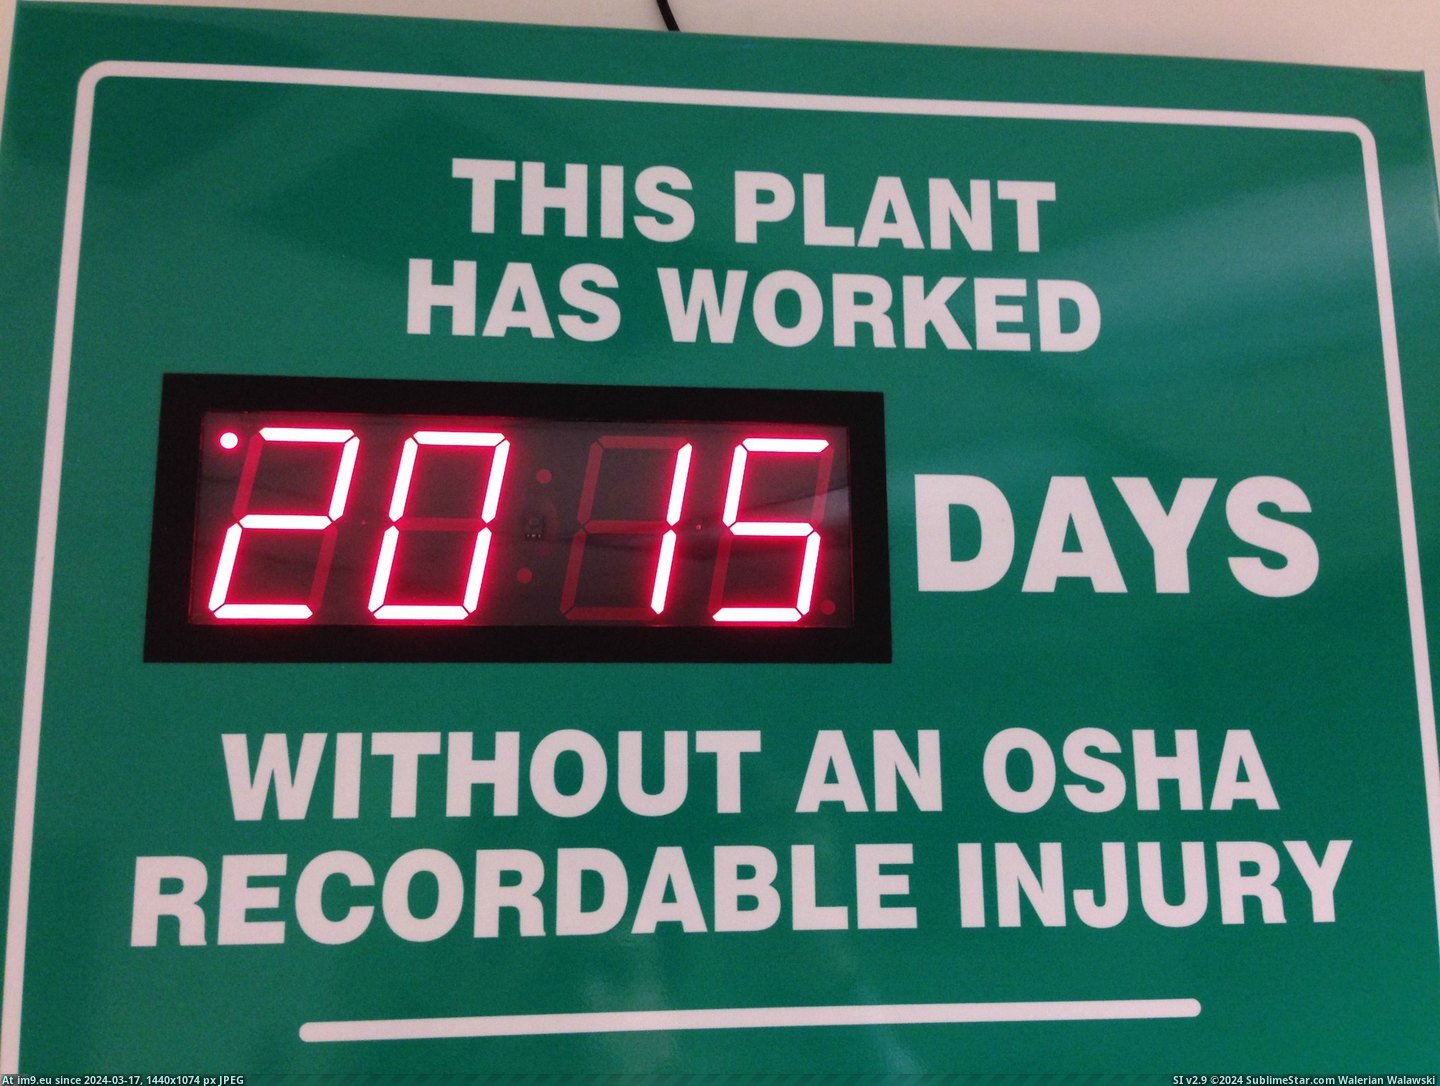 #Year #Work #Number #Injury #Equal #Consecutive #Reached #Current #Factory [Mildlyinteresting] The factory where I work reached a number of consecutive days without an injury equal to the current year Pic. (Изображение из альбом My r/MILDLYINTERESTING favs))